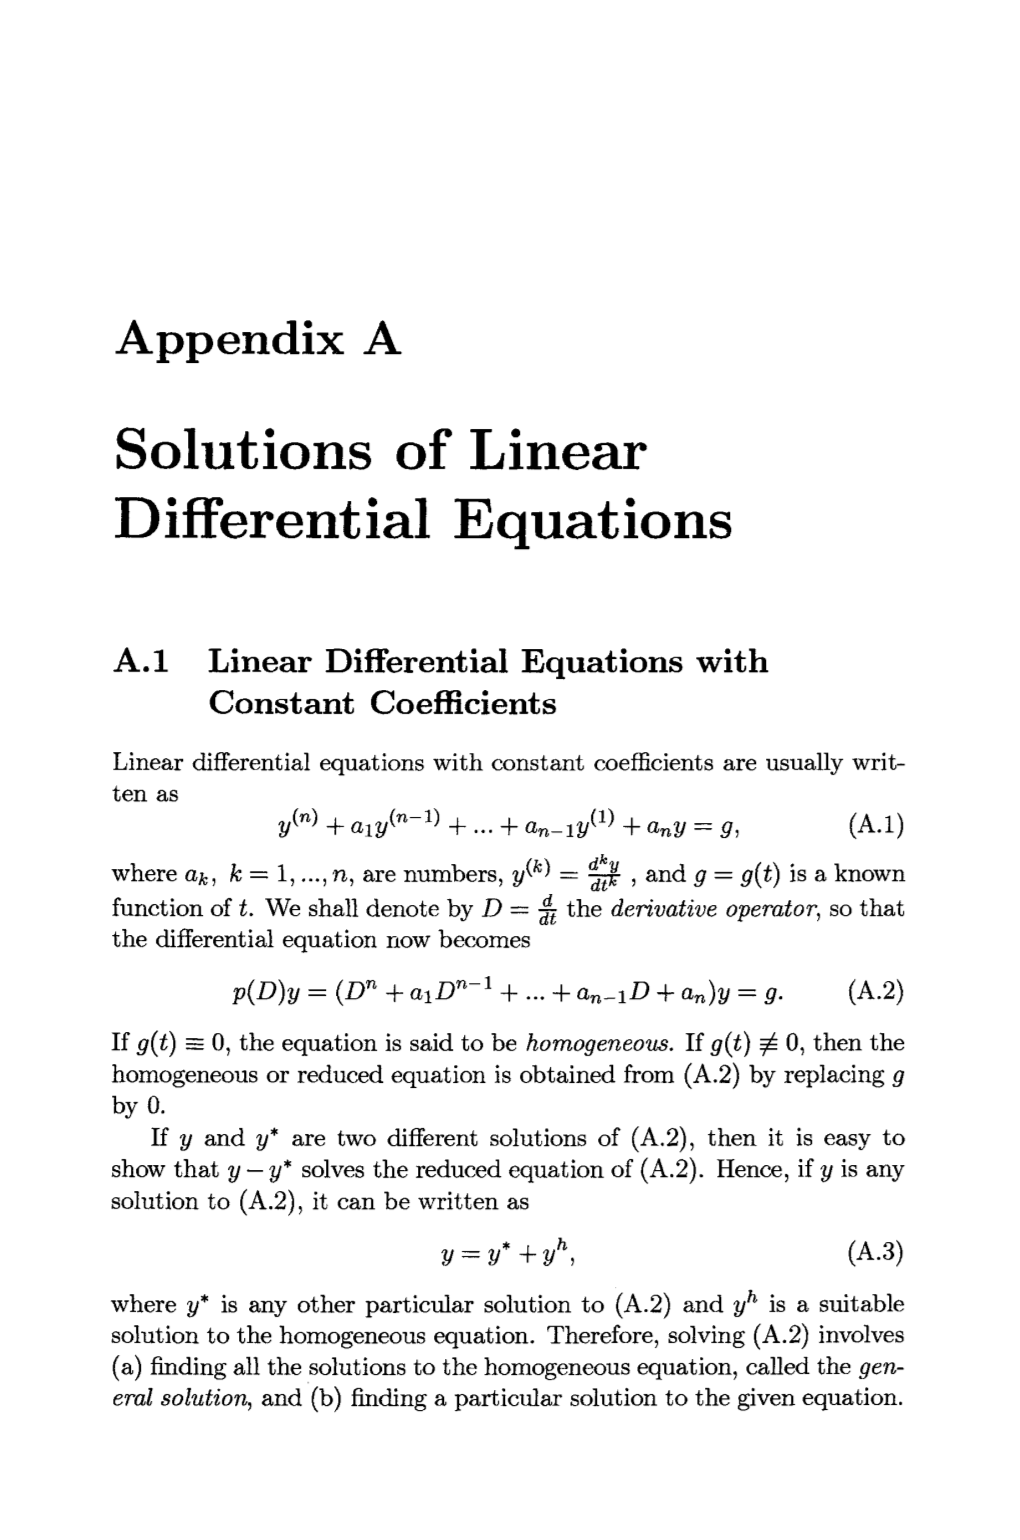 Solutions of Linear Differential Equations